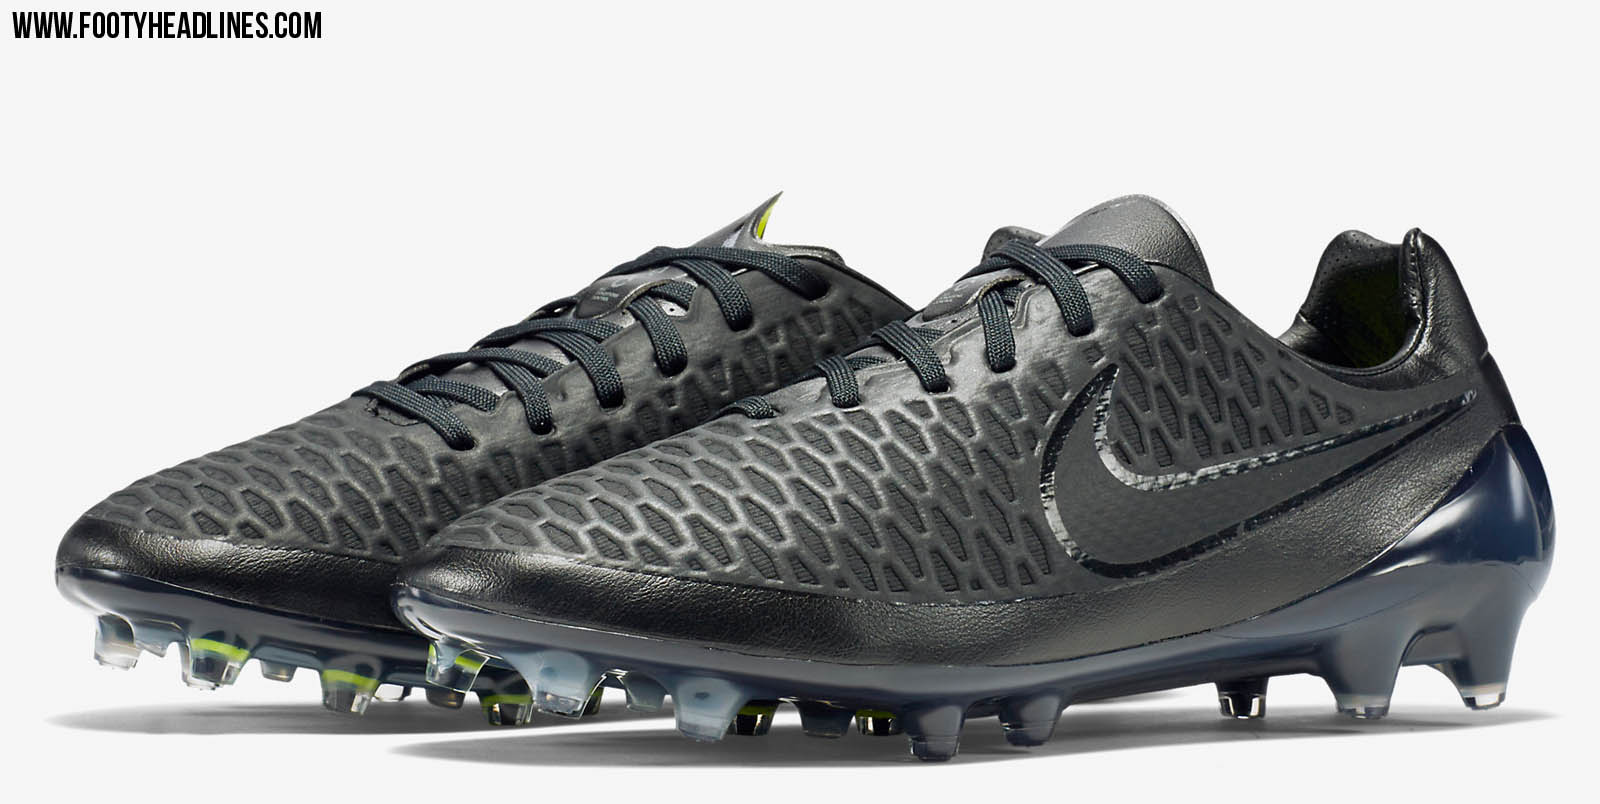 Blackout Nike Magista Academy Pack Boots Released - Footy Headlines